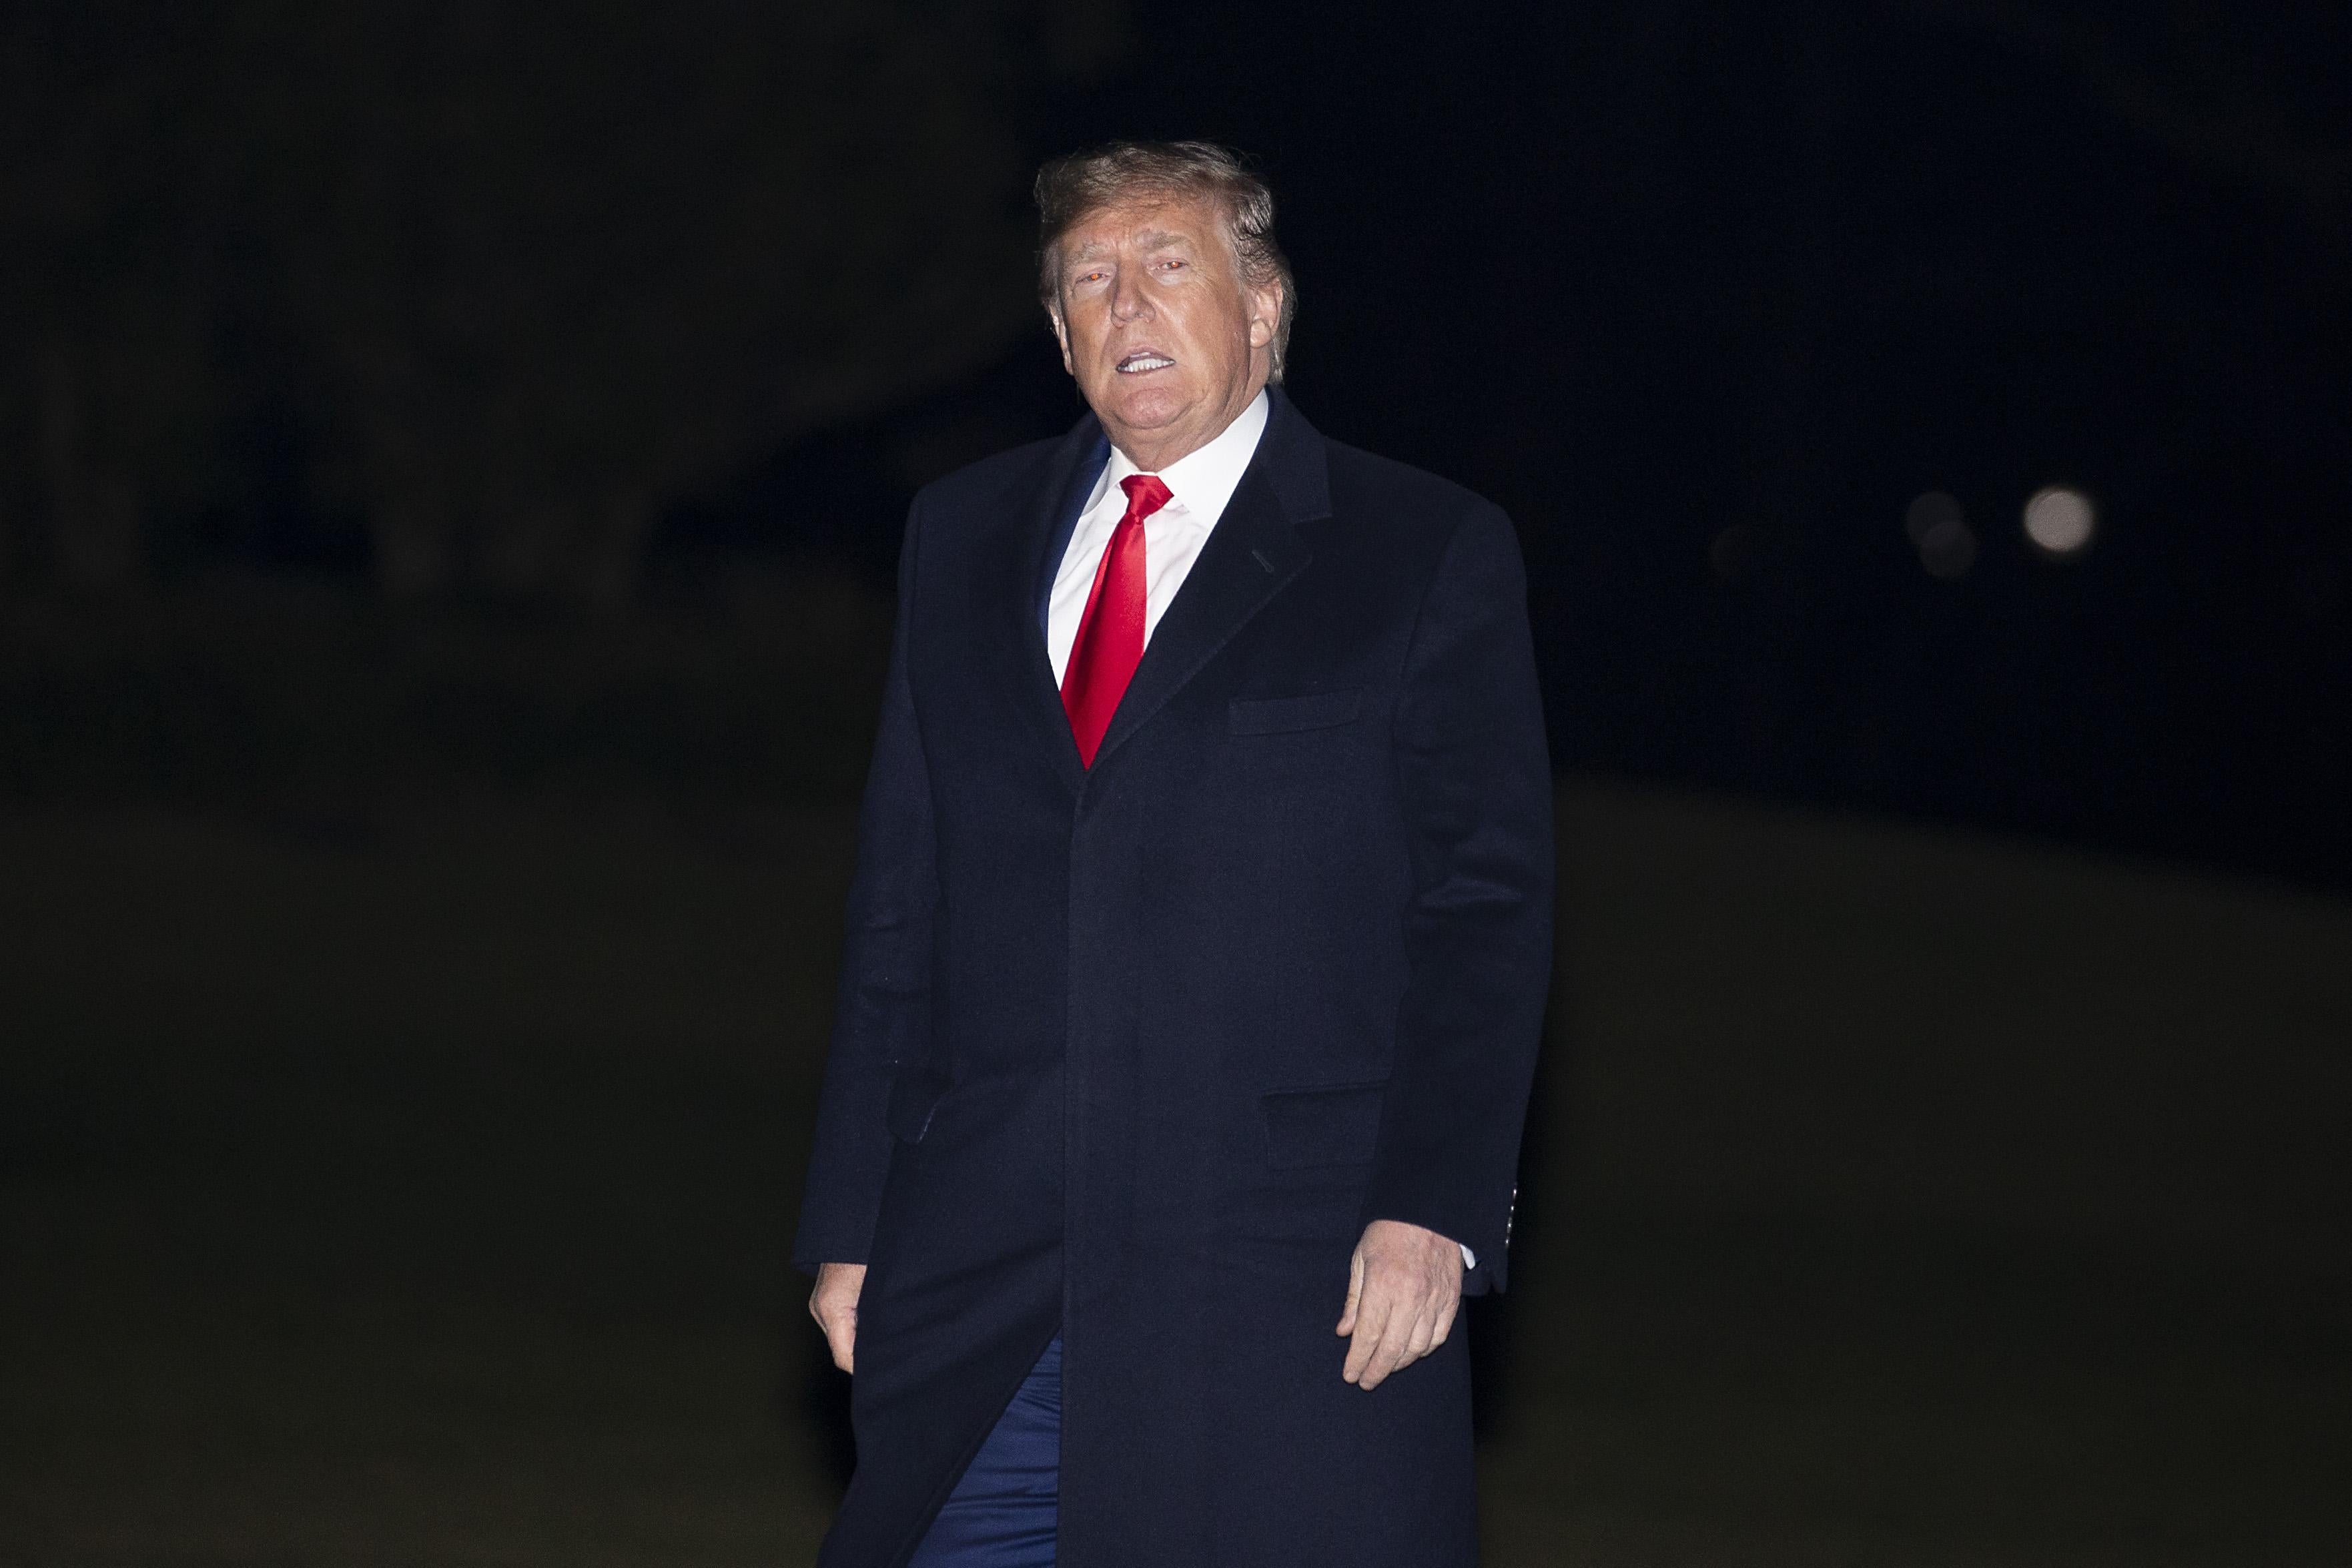 WASHINGTON, DC - JANUARY 09: U.S. President Donald Trump walks on the South Lawn of the White House on January 9, 2020 in Washington, DC. President Trump attended a campaign rally in Toledo, Ohio on Thursday evening. (Photo by Tasos Katopodis/Getty Images)